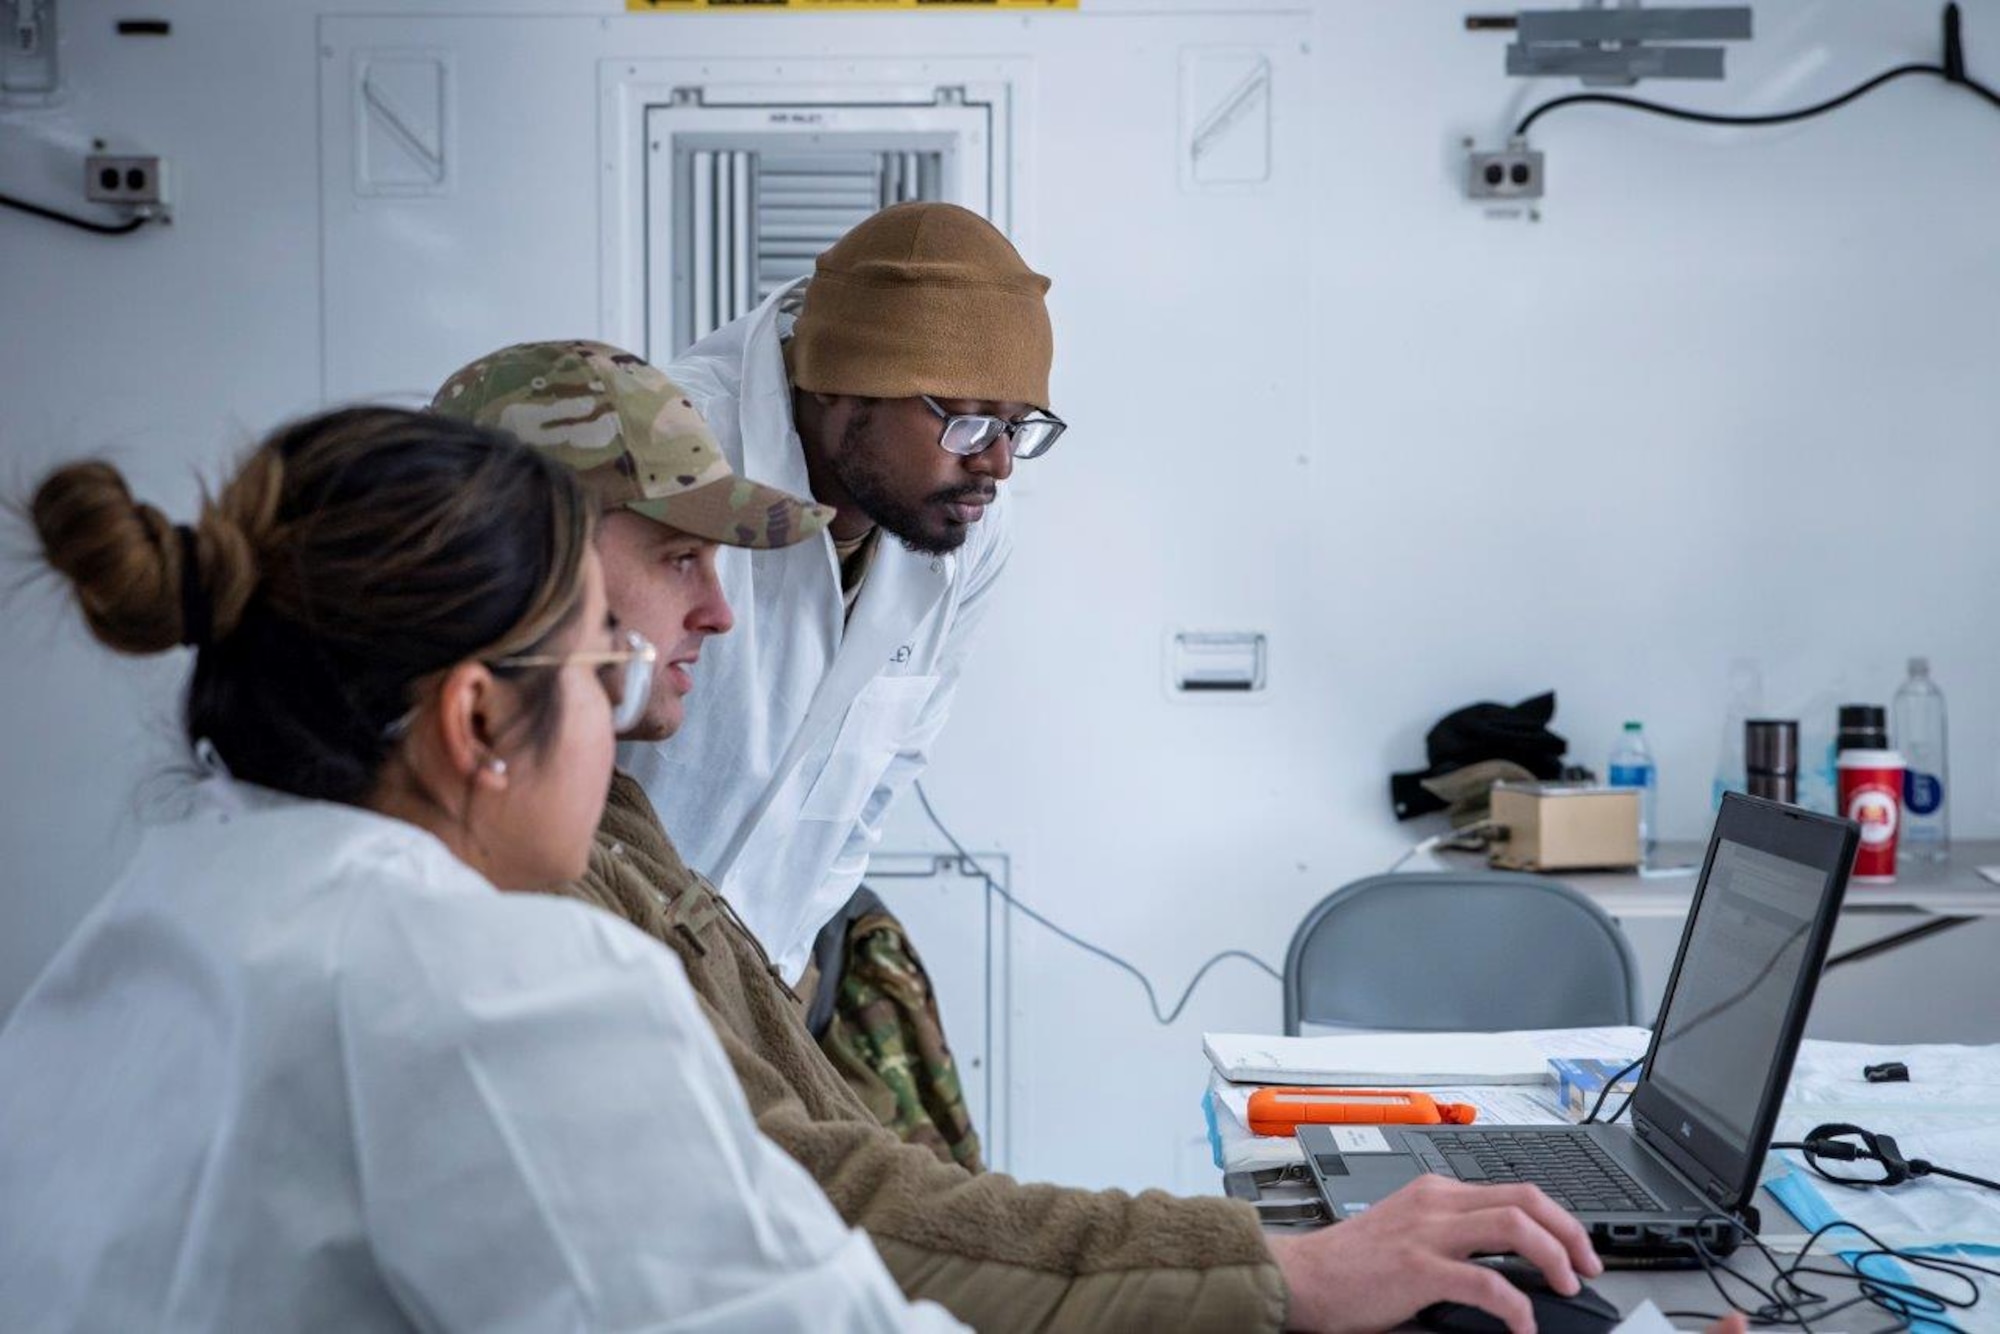 Staff Sgt. Atiba Timley, Staff Sgt. Justin Hart, and Staff Sgt. Rizamarie Arthur process radiological samples for analysis during a field exercise in March 2022 at the Warfighter Training Facility at Wright-Patterson Air Force Base. This exercise is part of the Air Force Radiation Assessment Team basic course at the USAF School of Aerospace Medicine. (U.S. Air Force photo / Richard Eldridge)